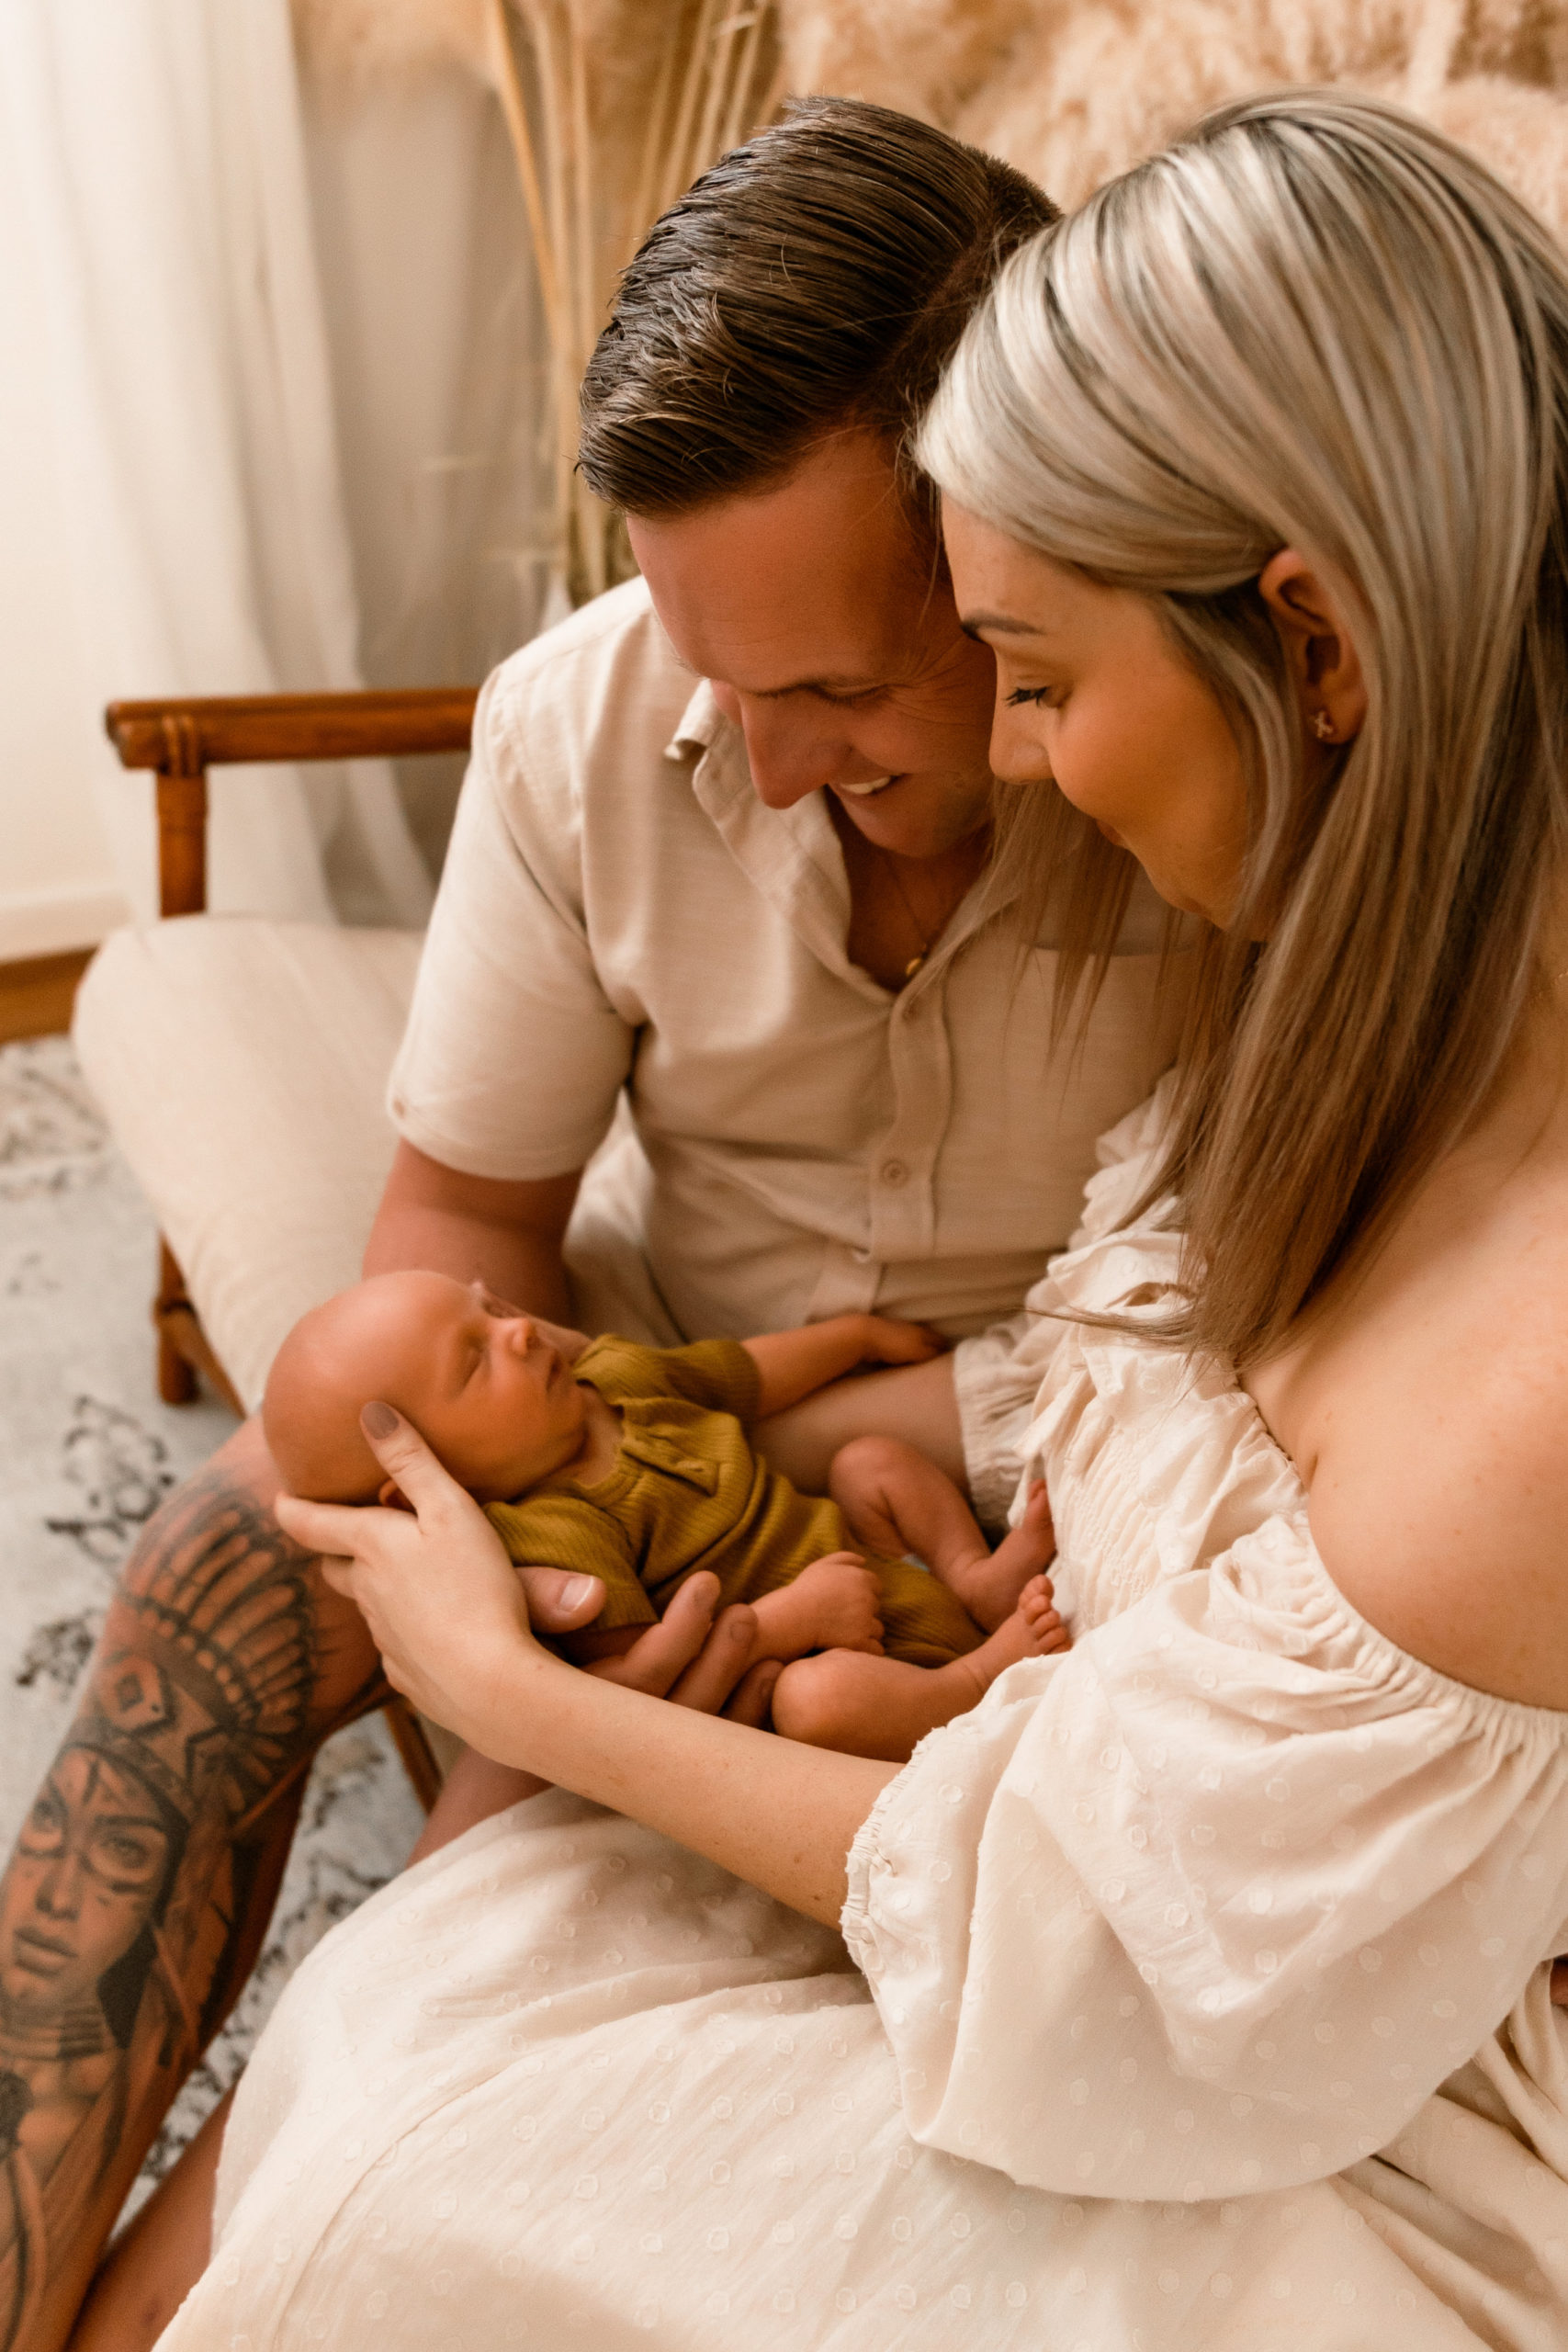 Brisbane Newborn Photography based in Brookwater, Ipswich. Gentle, timeless and loved-up photography for new mothers and cherished babies